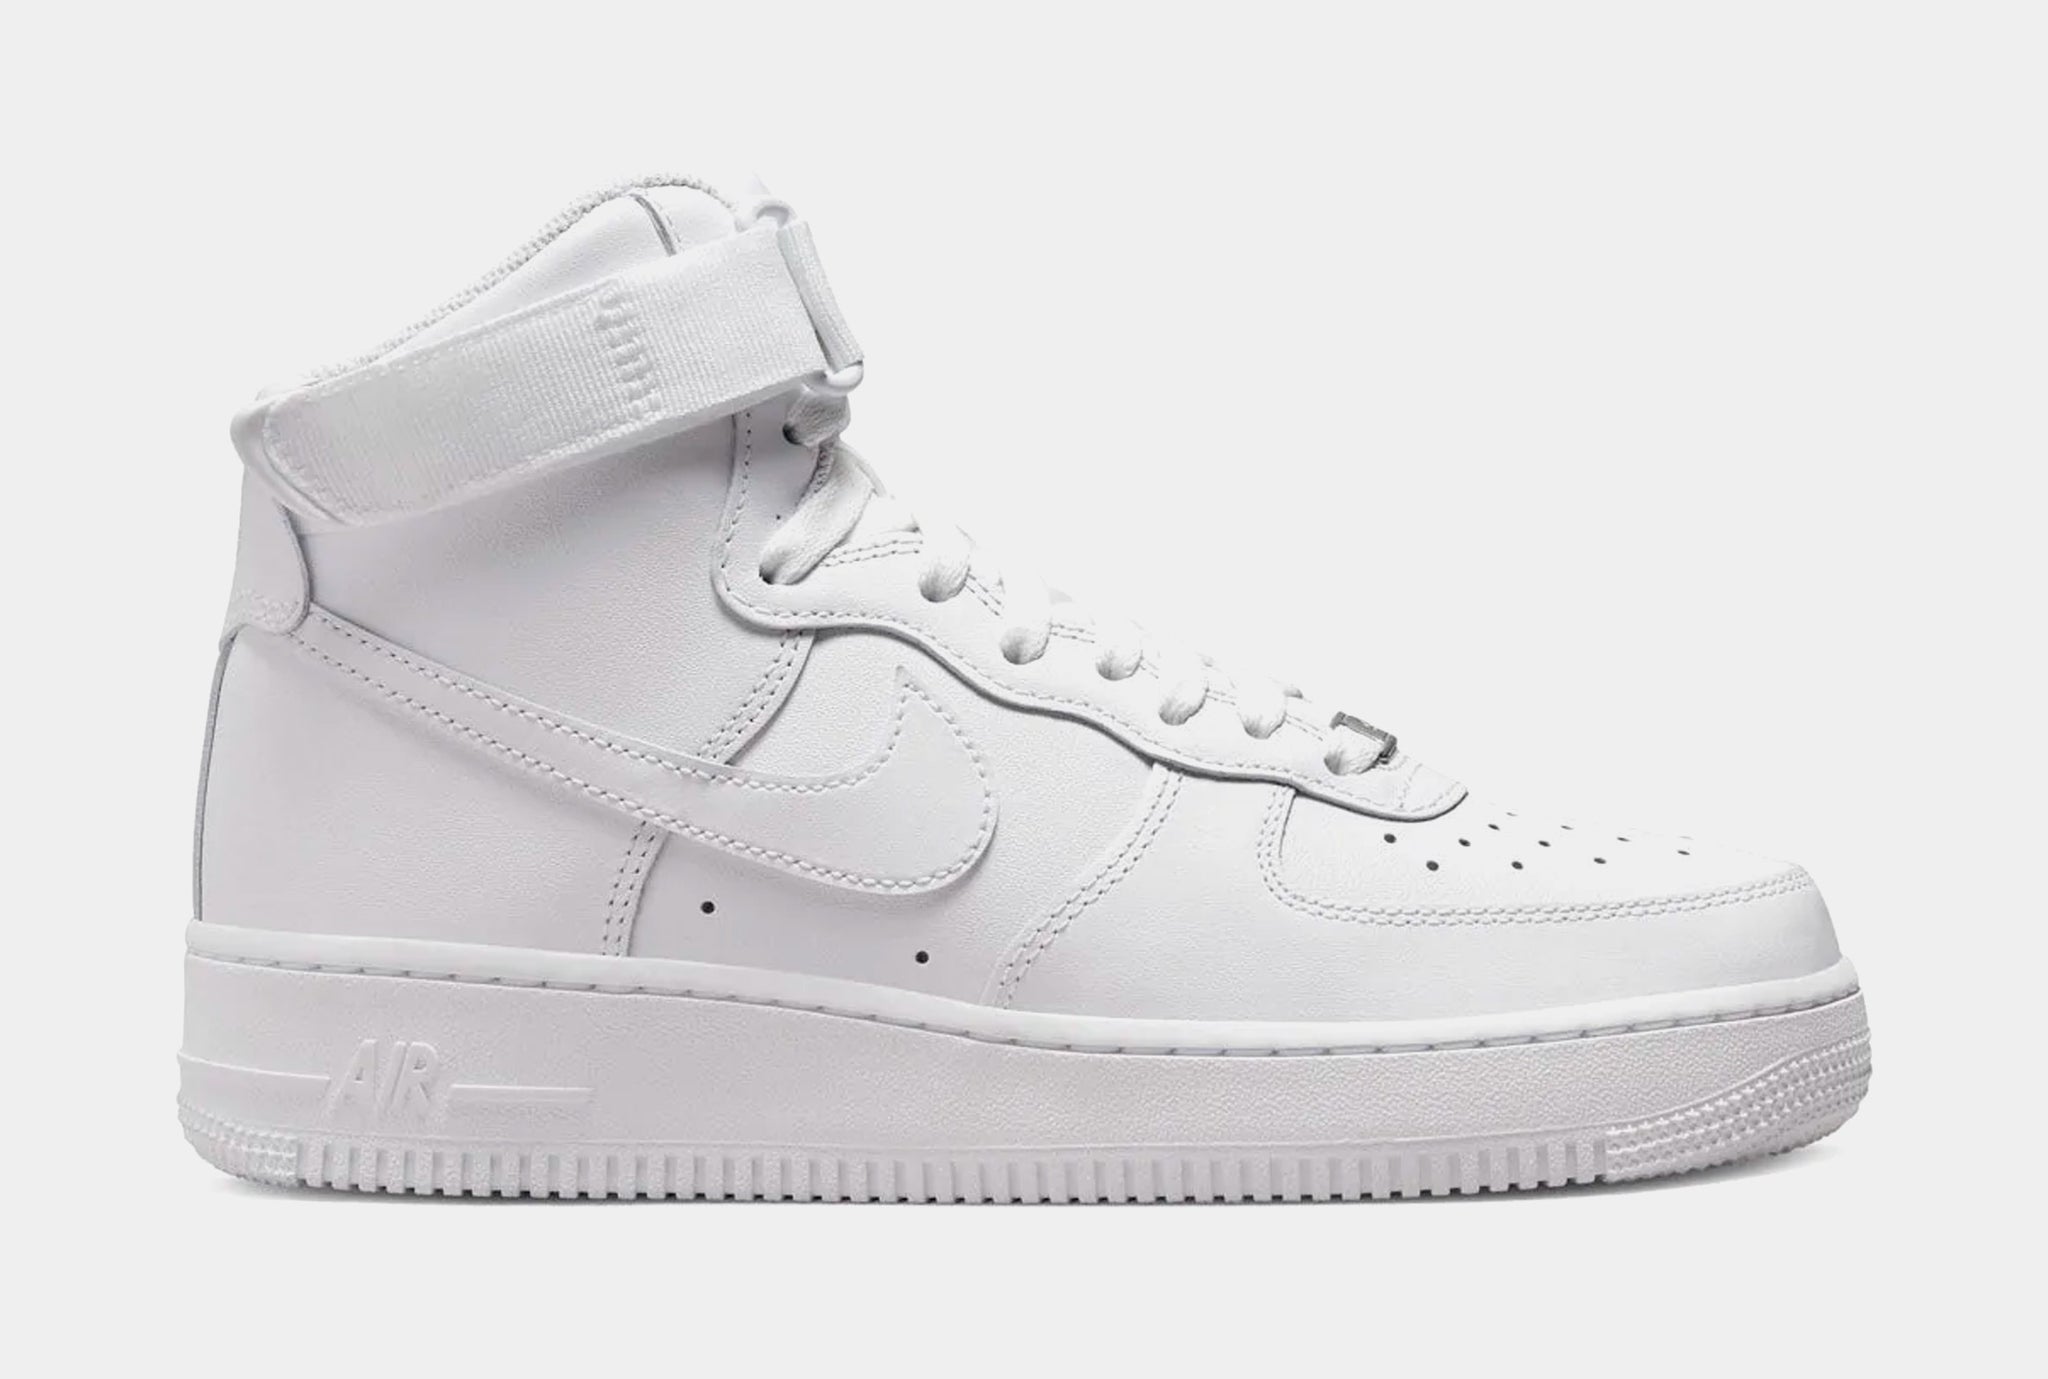 Nike Air Force 1 High Womens Lifestyle Shoes White DD9624-100 – Shoe Palace